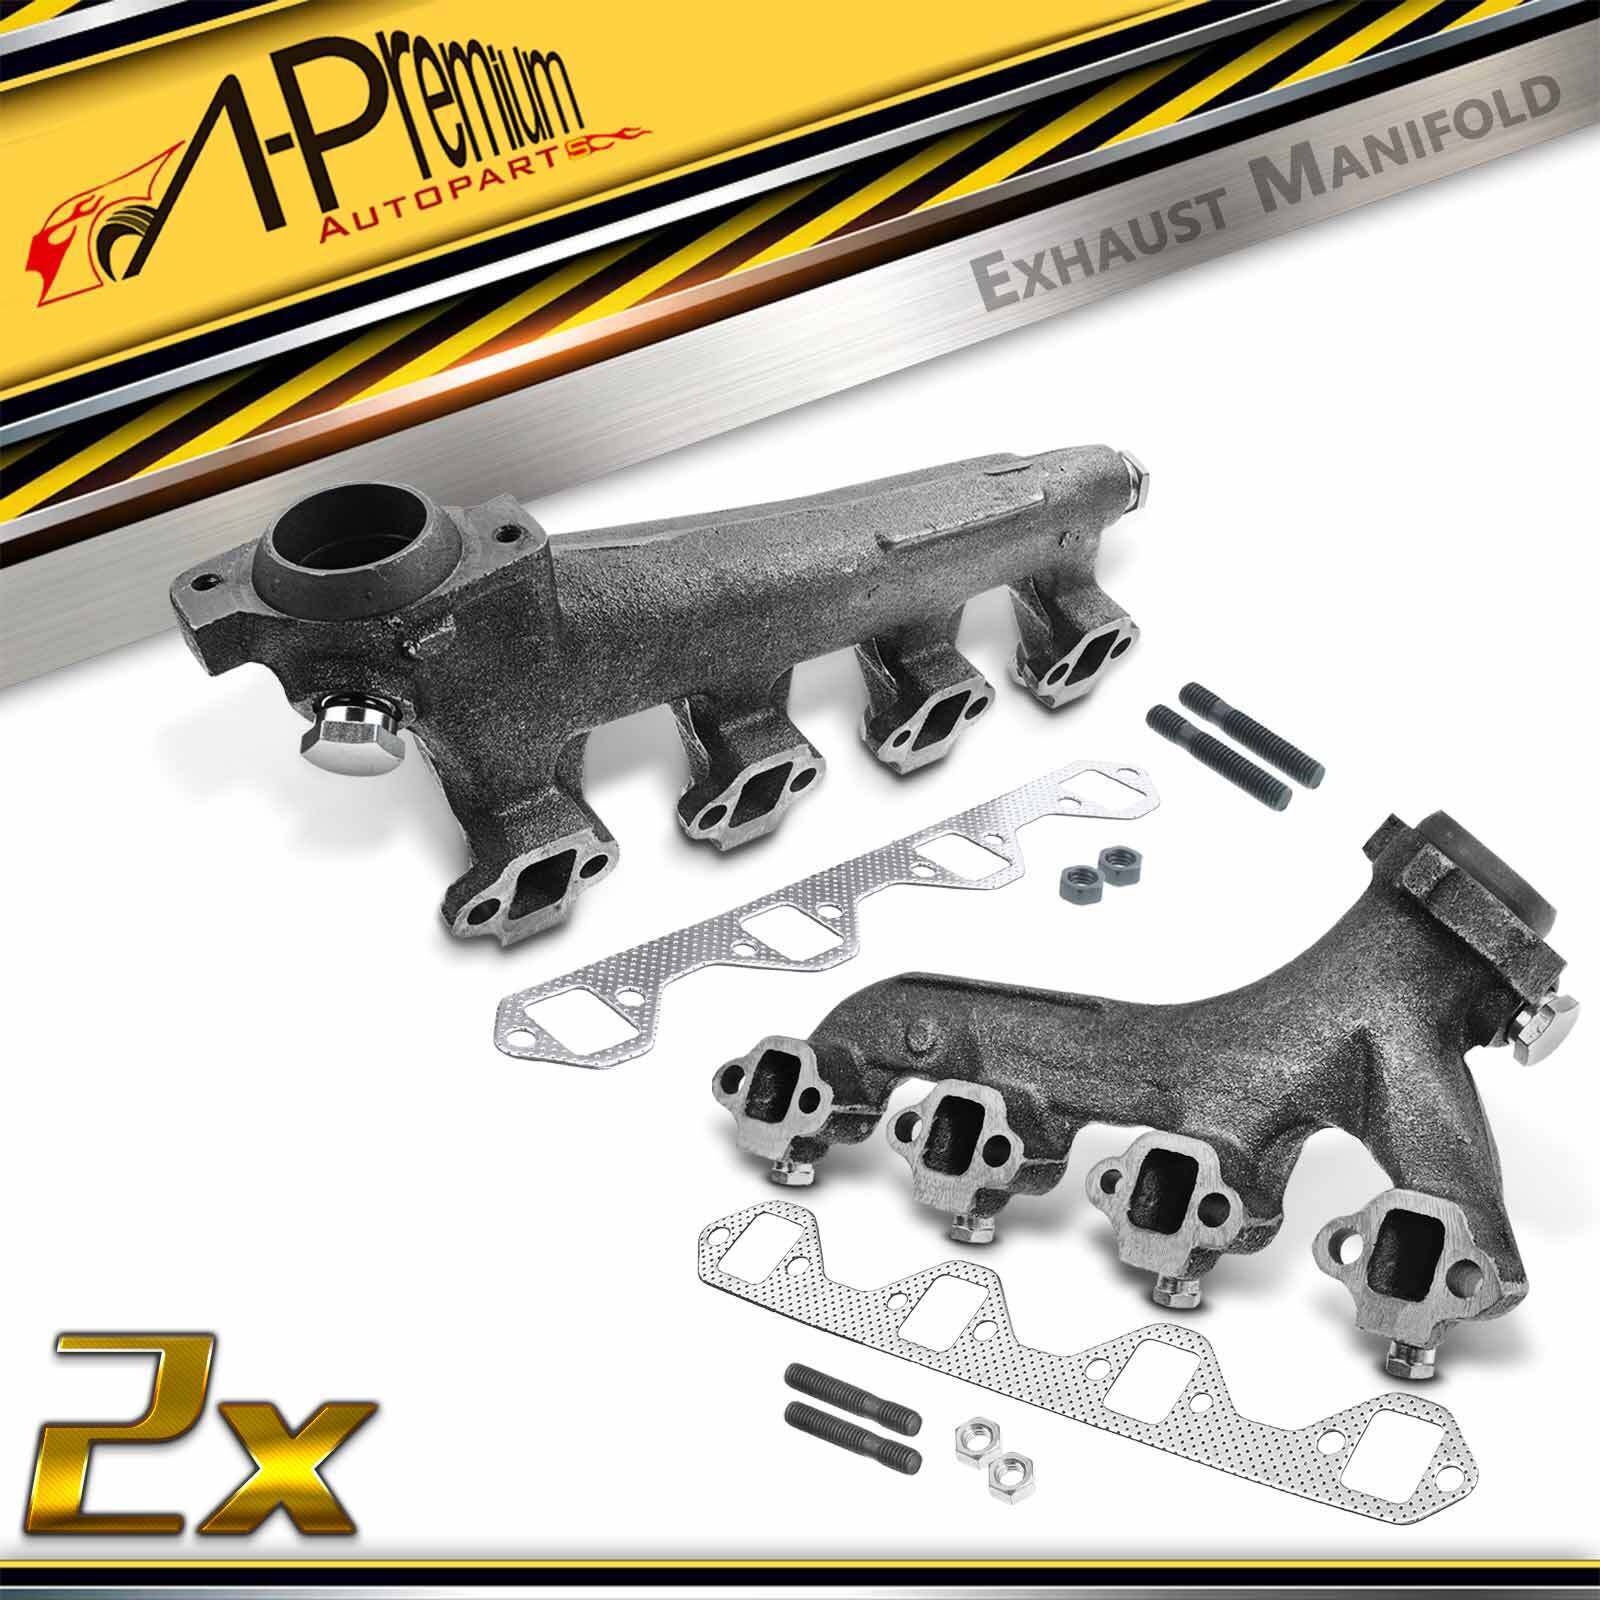 2x Left & Right Exhaust Manifold w/ Gasket Kit for Ford Bronco F-150 250 350 V8